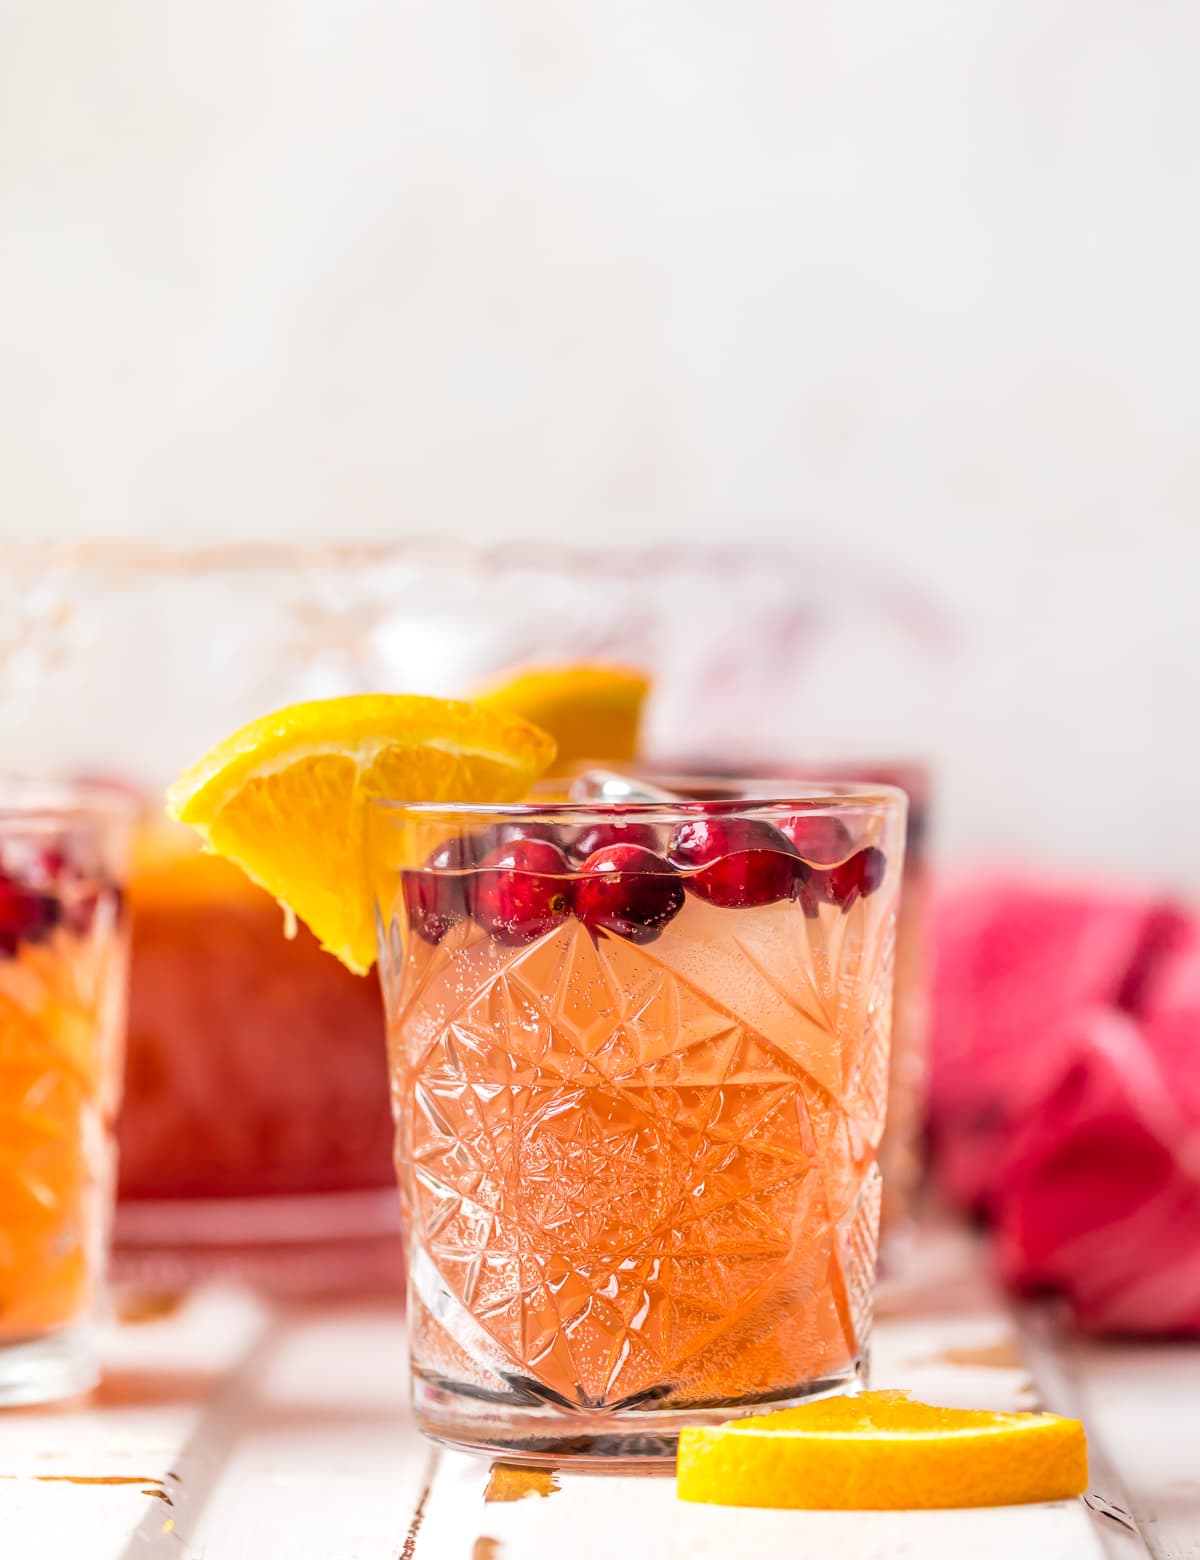 A glass filled with cranberry orange holiday punch recipe